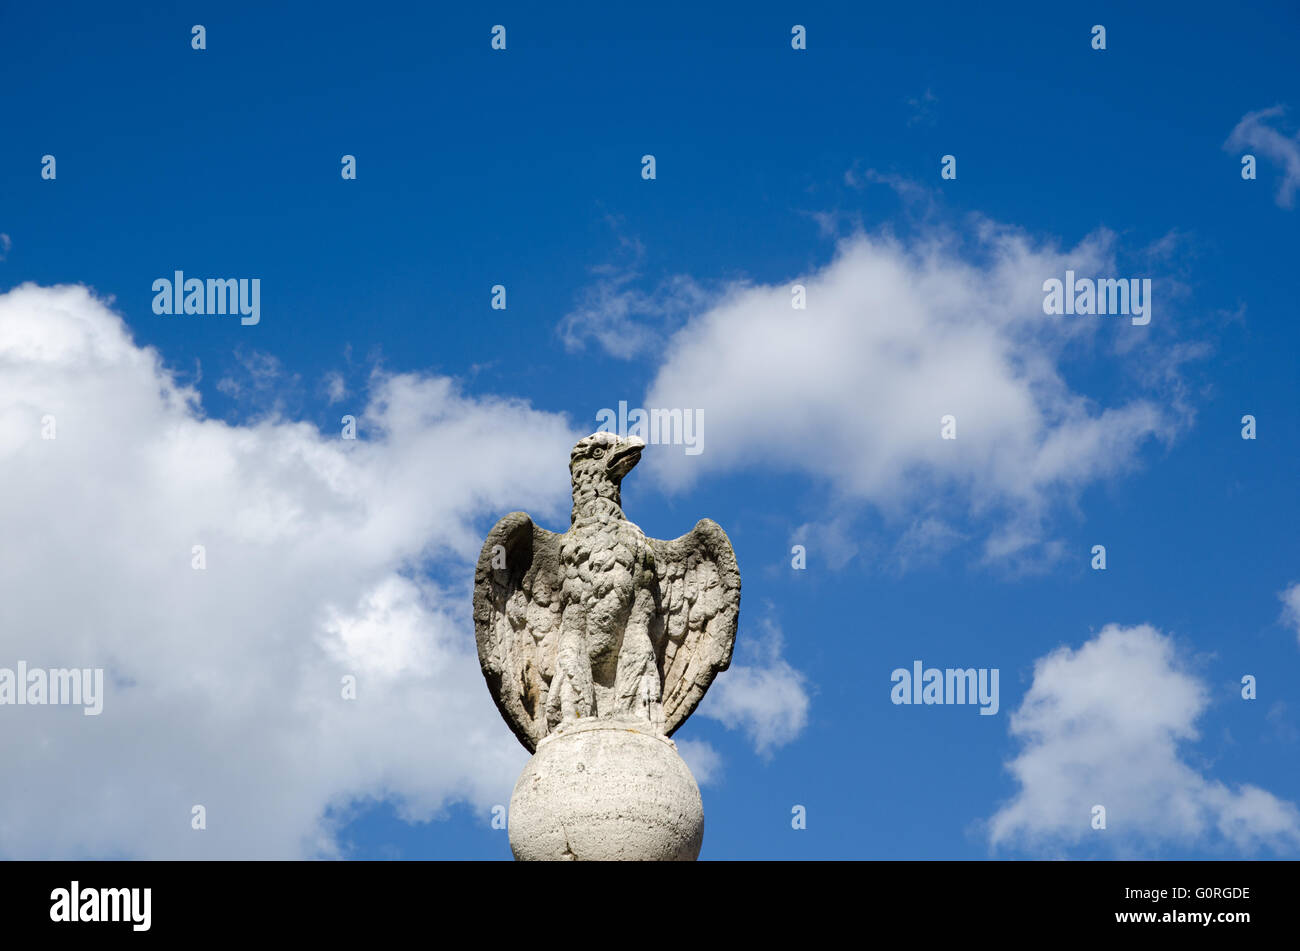 Ancient eagle statue at blue sky with white clouds in Rome, Italy Stock Photo